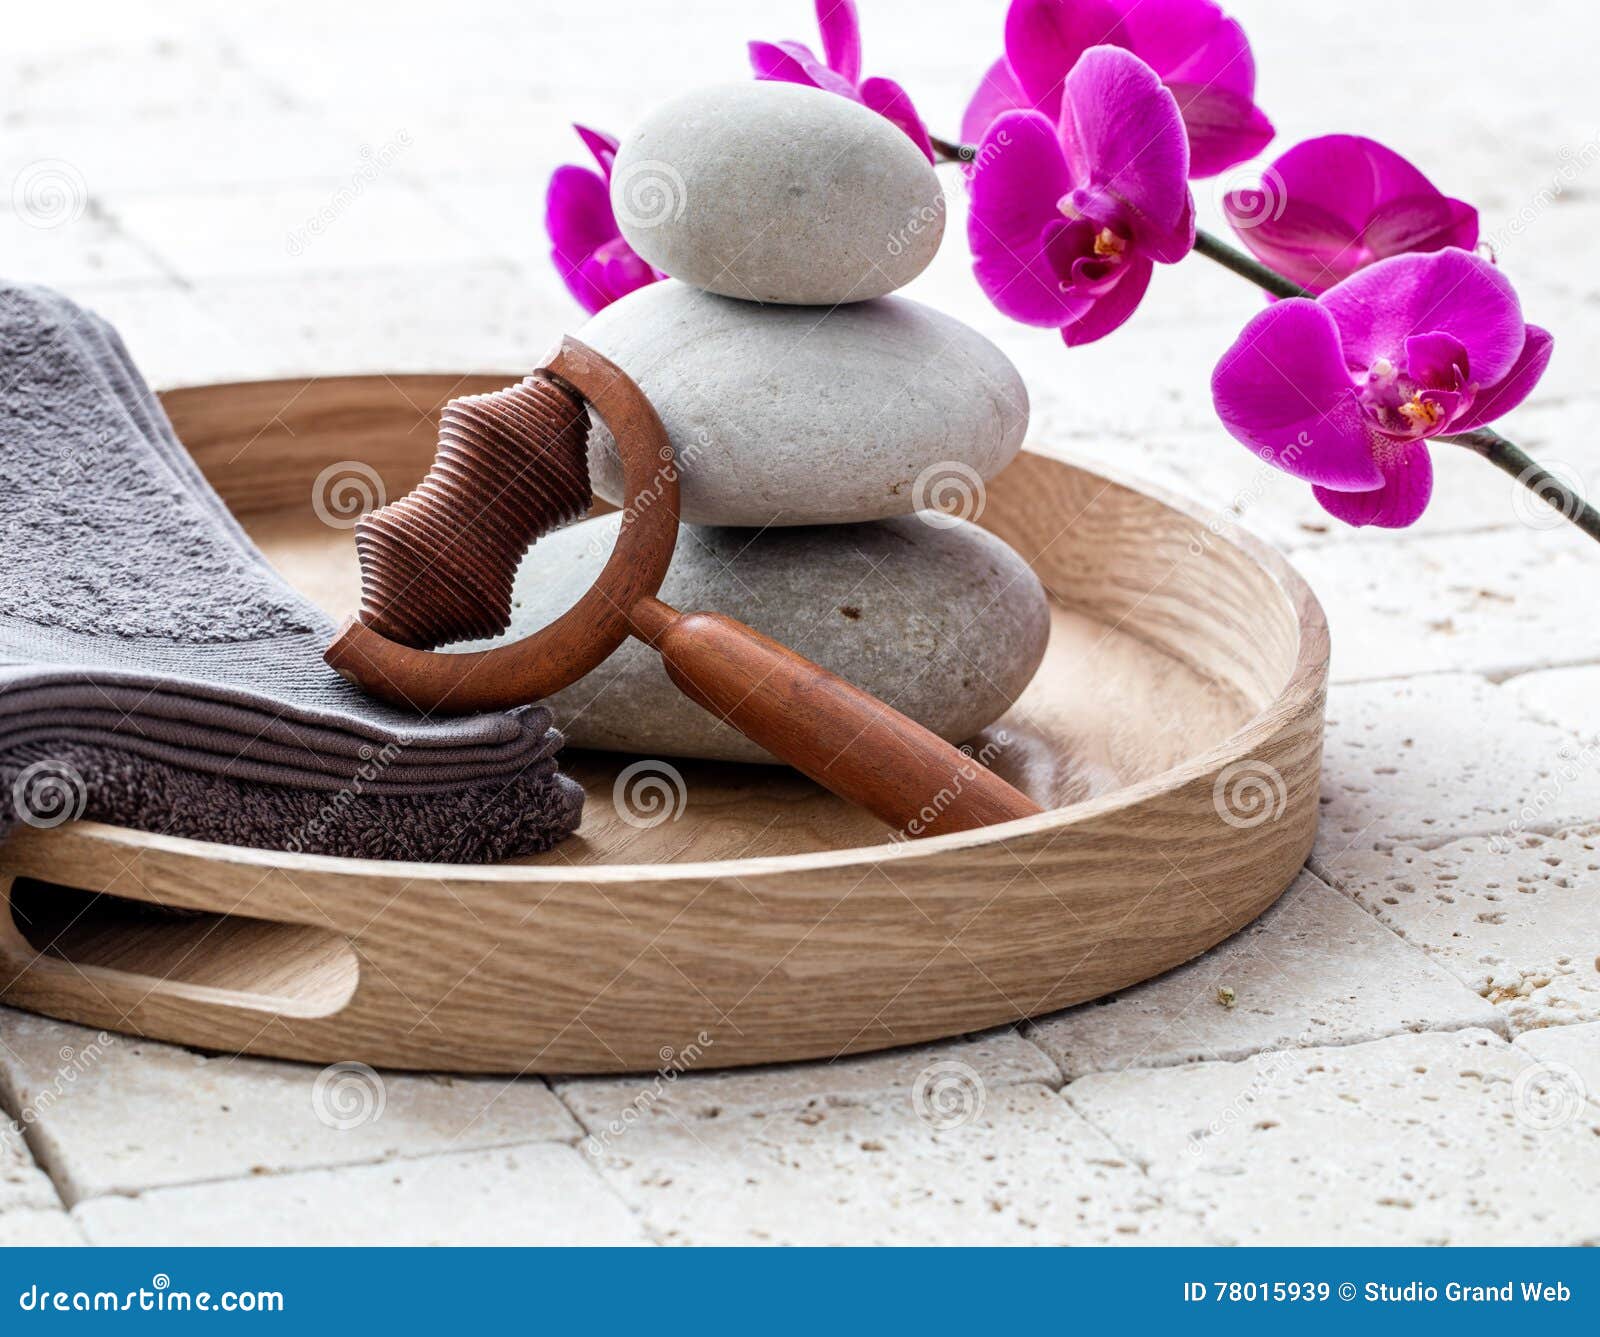 Ayurveda And Mindfulness For Calming Body Massage Over Balancing Stones